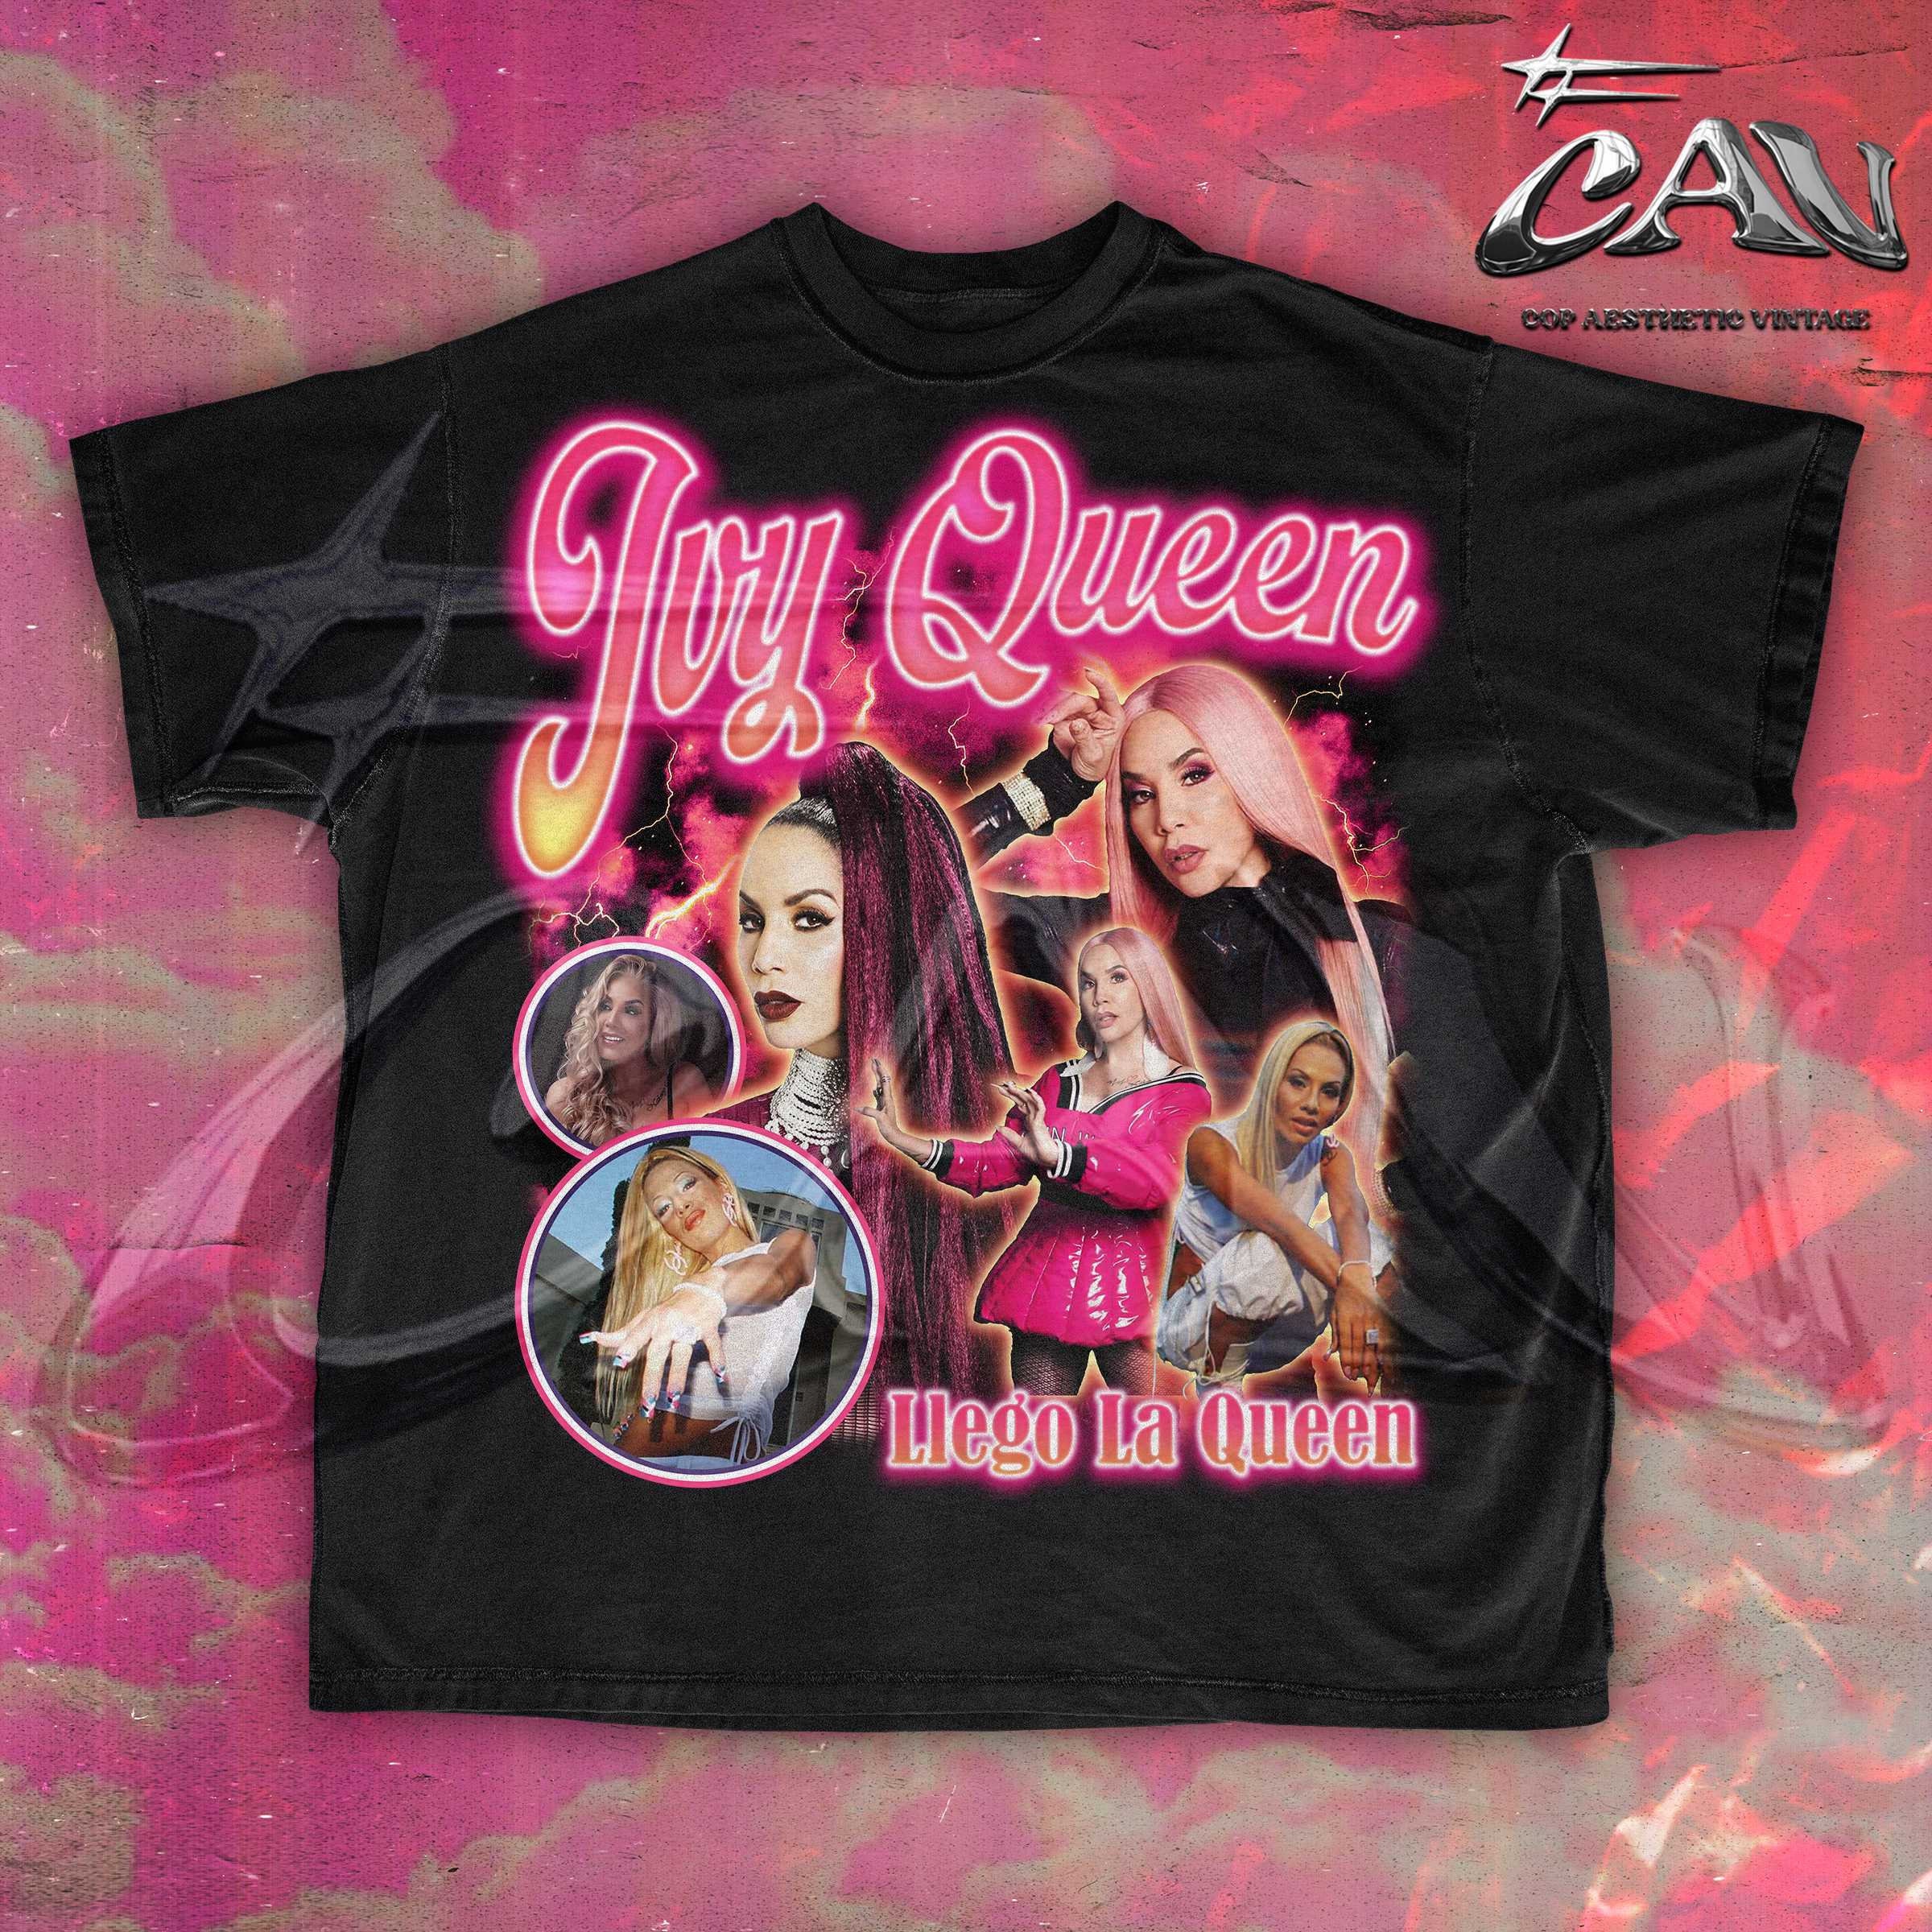 Ivy Queen Bootleg Hip-hop Vintage Style T-shirt Rican - Israel